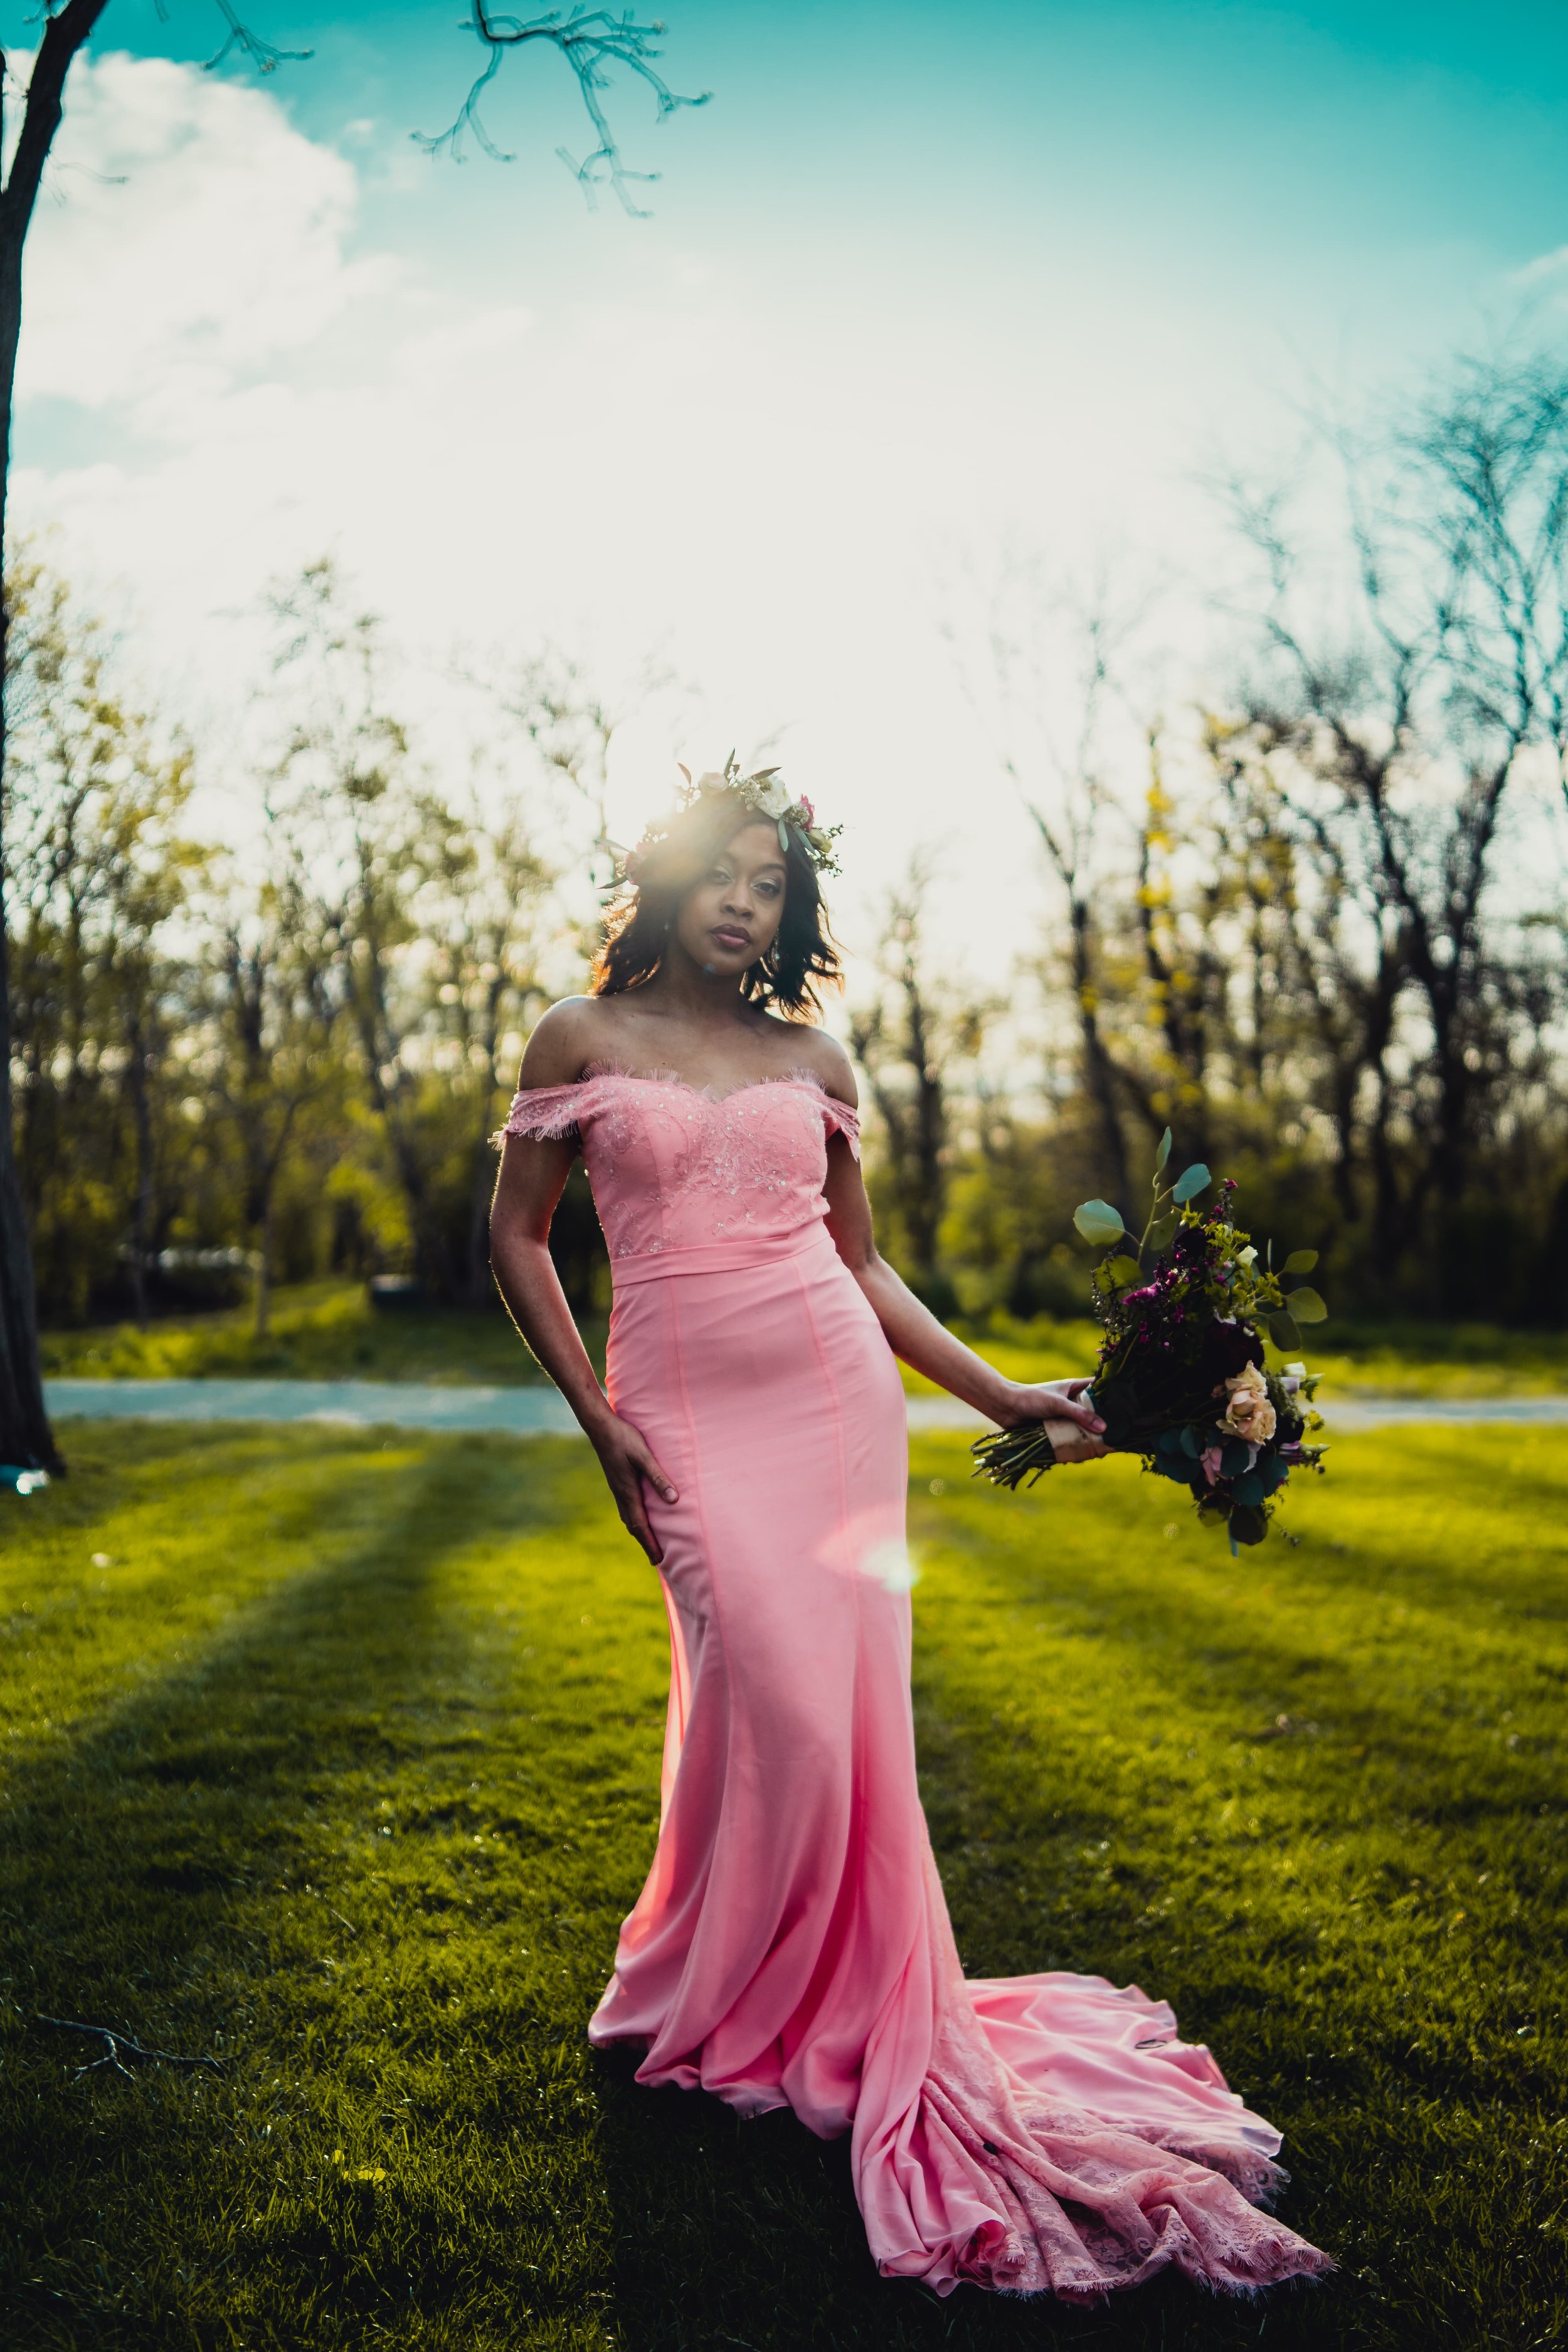 MikeTaylorProductions_WhattapuddleFarms_StyledShoot_4282019_Brittany Neal-23-min.jpg